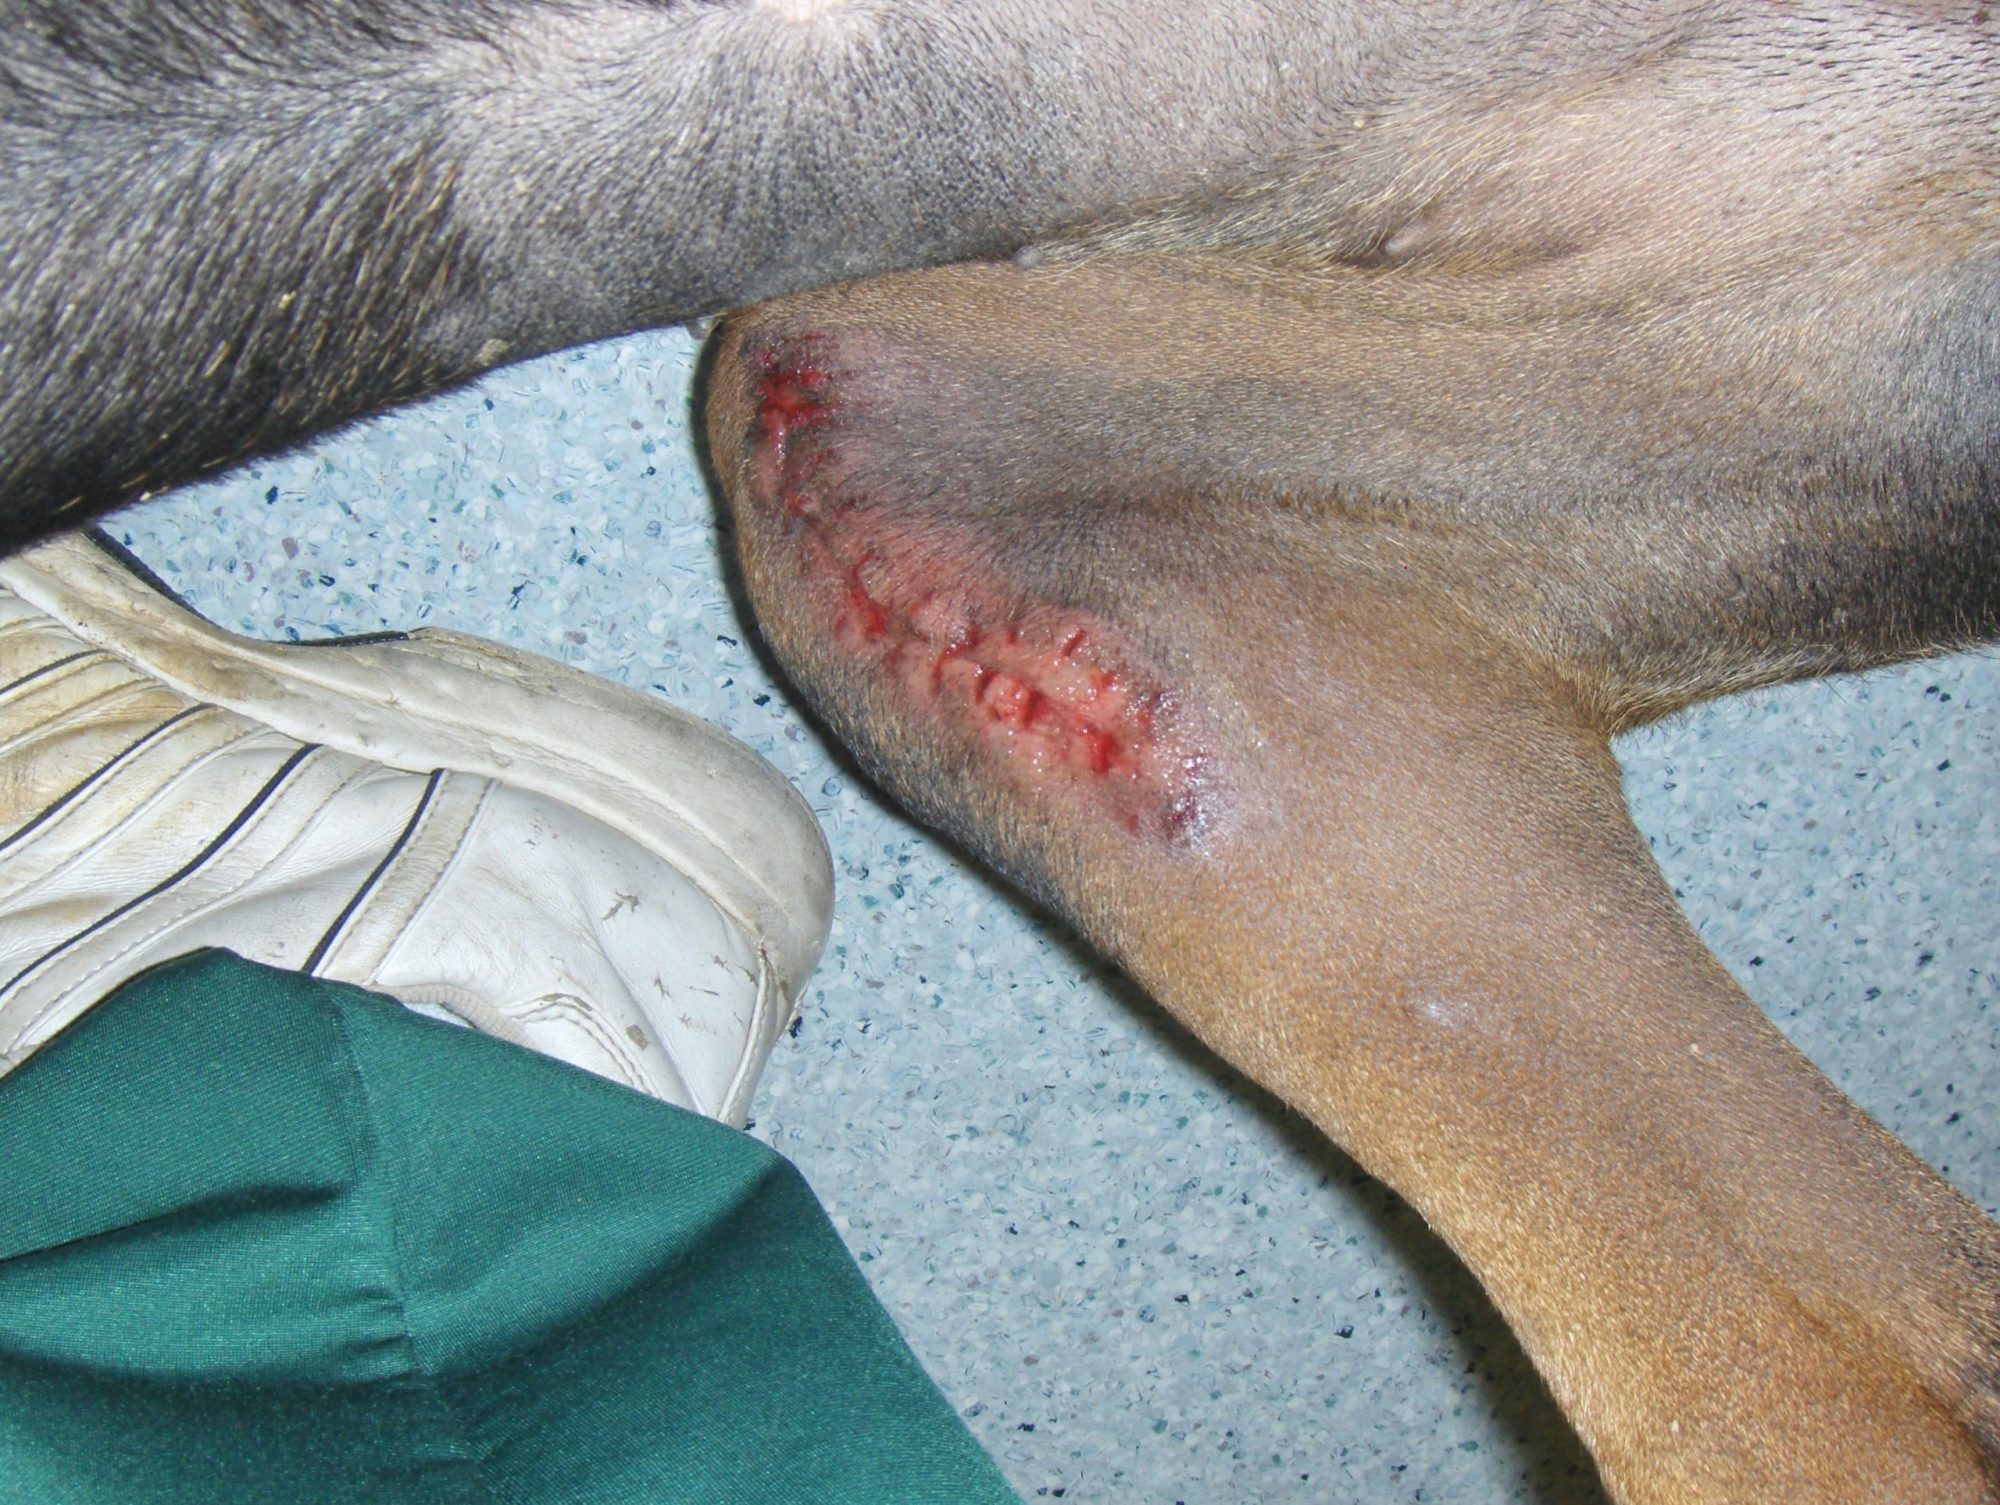 An incision that the dog licked open